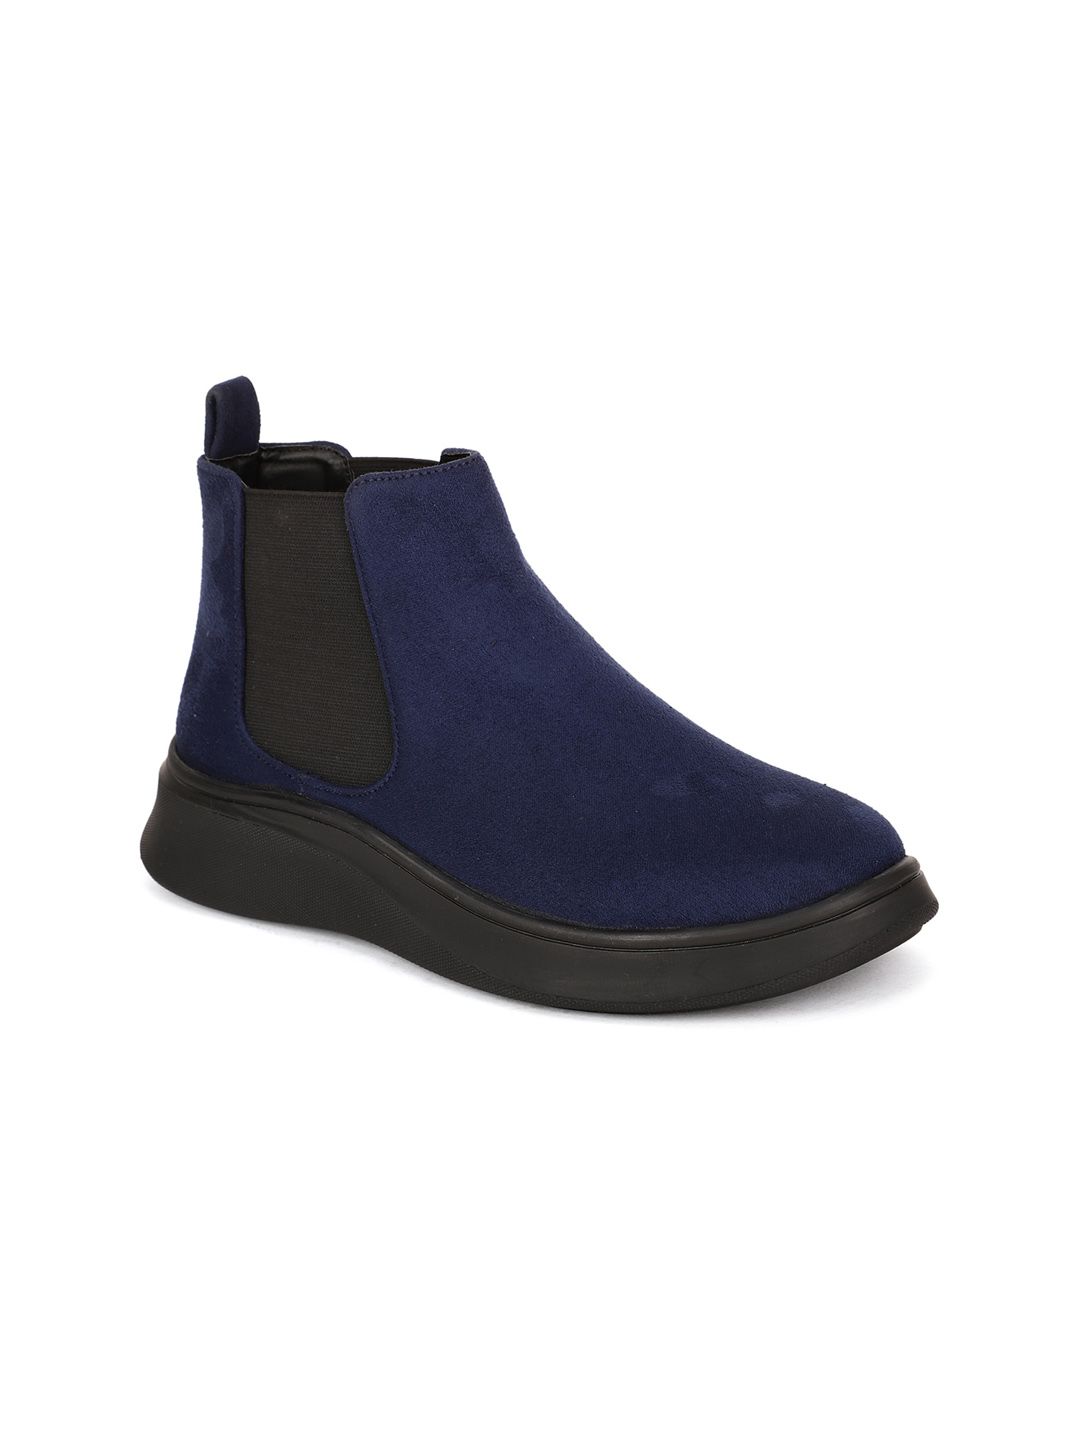 Bruno Manetti Navy Blue & Black Suede High-Top Comfort Heeled Cheslsea Boots Price in India